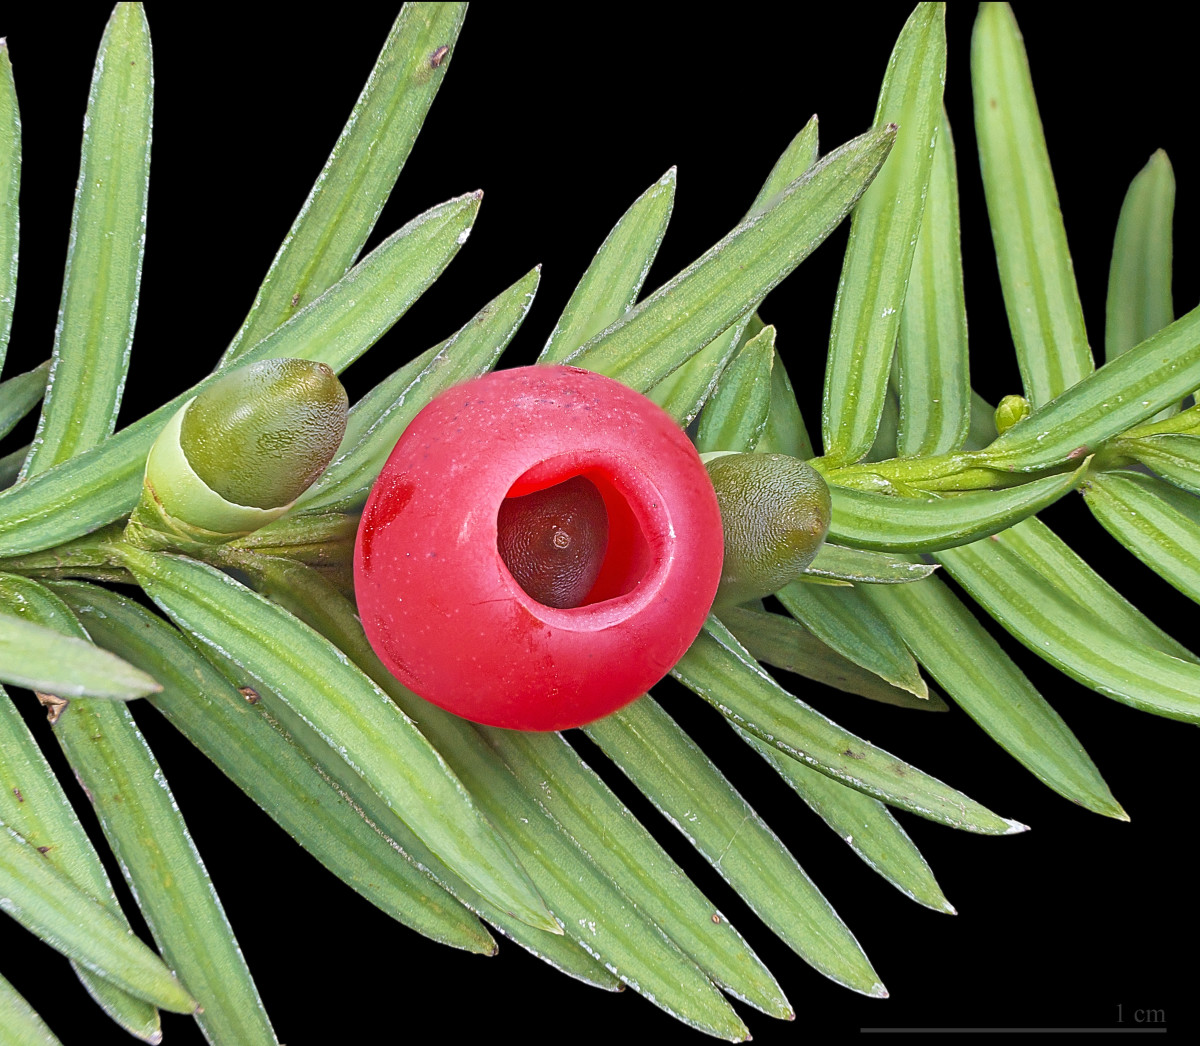 Mature and immature cones of the European yew, or Taxus baccata